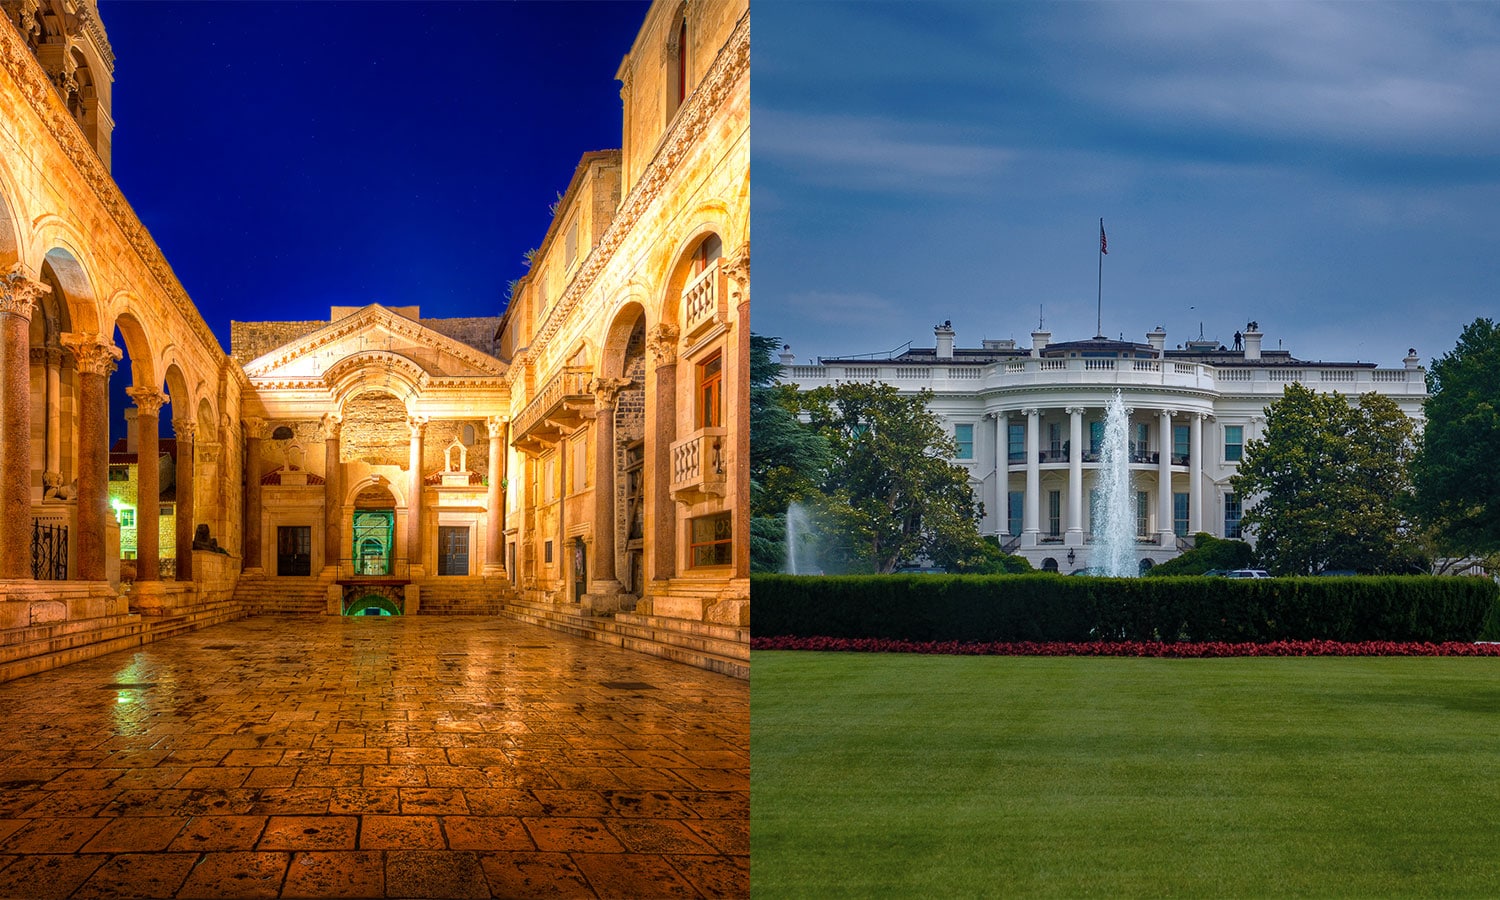 This Croatian Game Of Thrones Palace And The White House Has Something In Common!